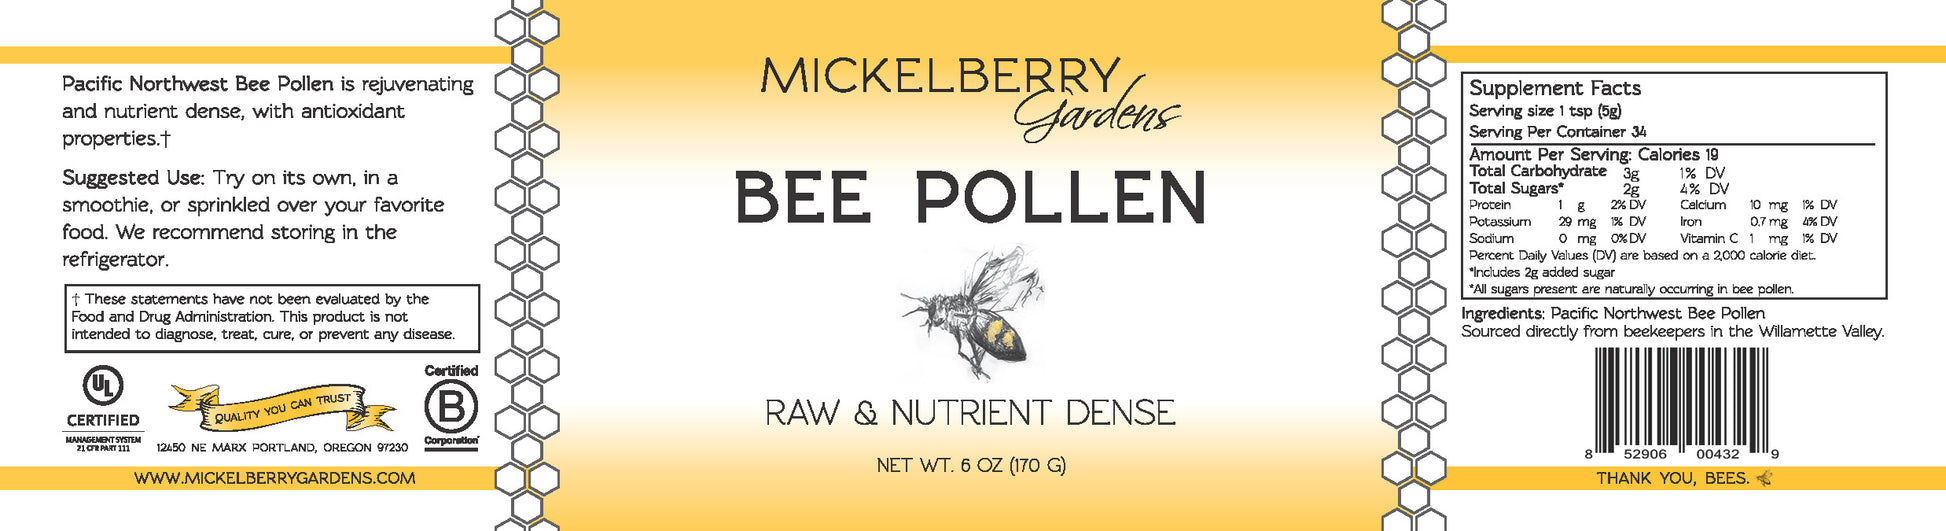 Local Bee Pollen Is the Only Thing That Cured My Seasonal Allergies